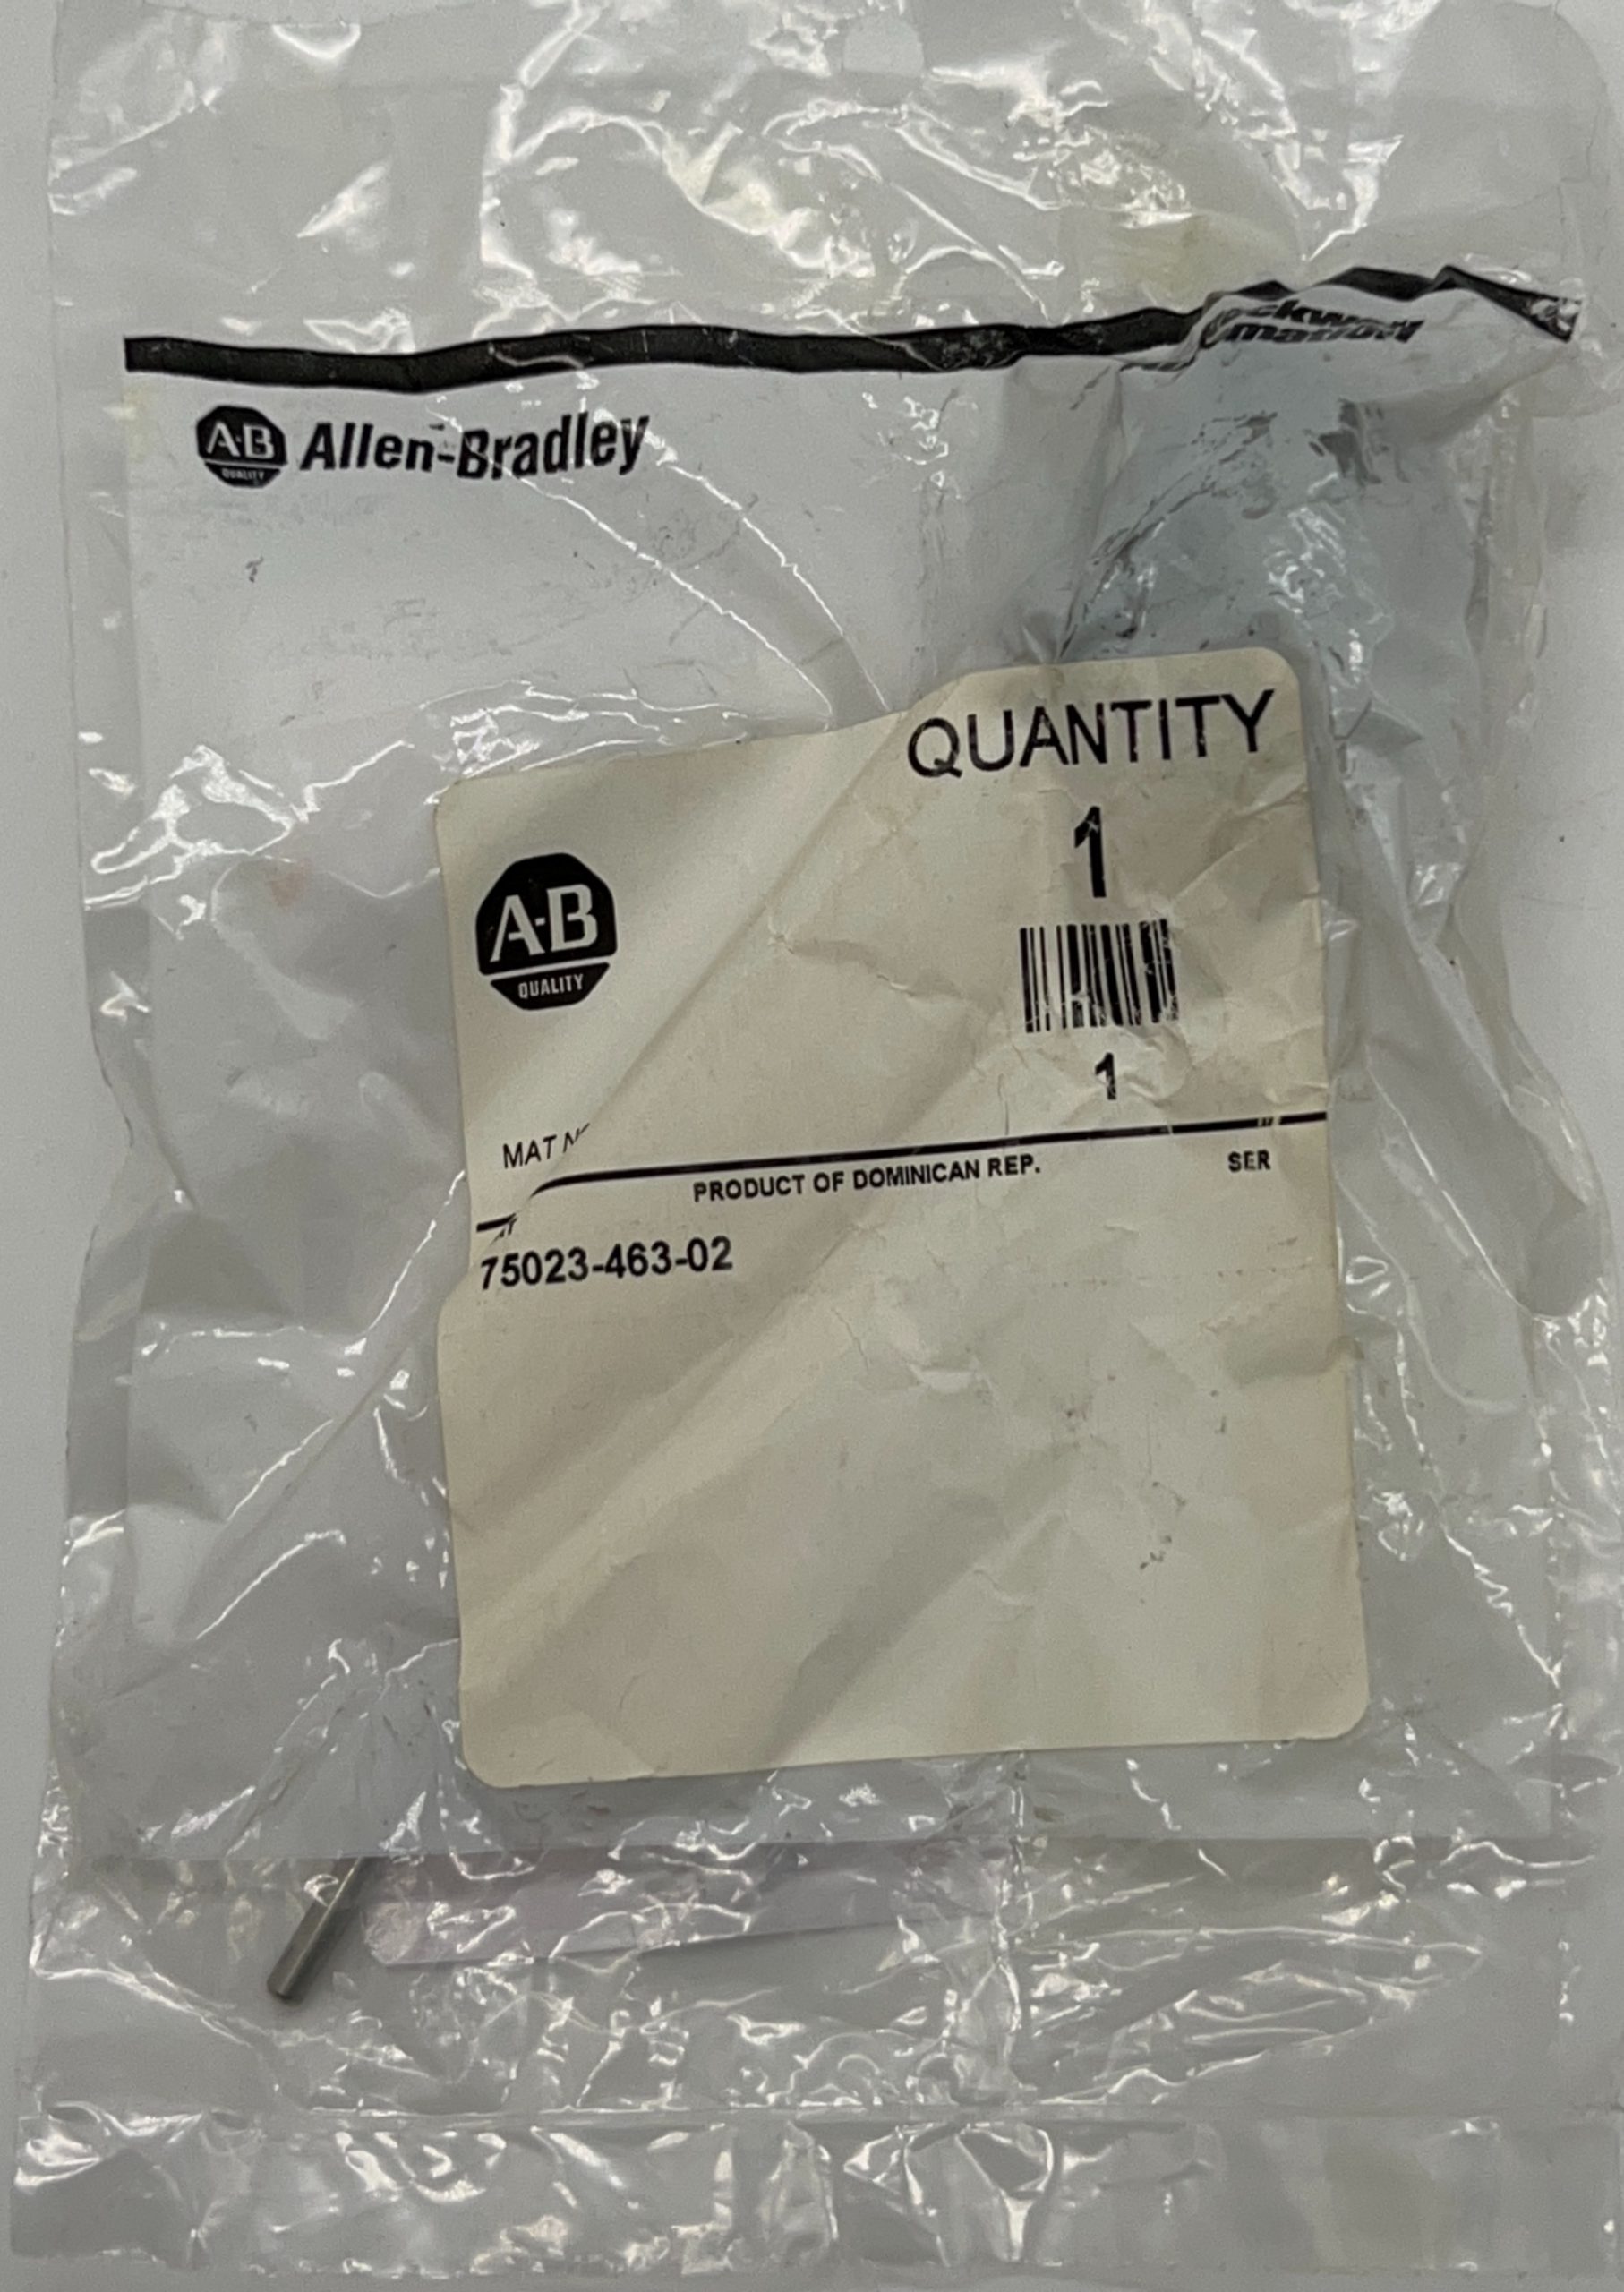 ALLEN BRADLEY 75023-463-02 1lb 8x4x4 QTY 1 contact for pricing _page-0001